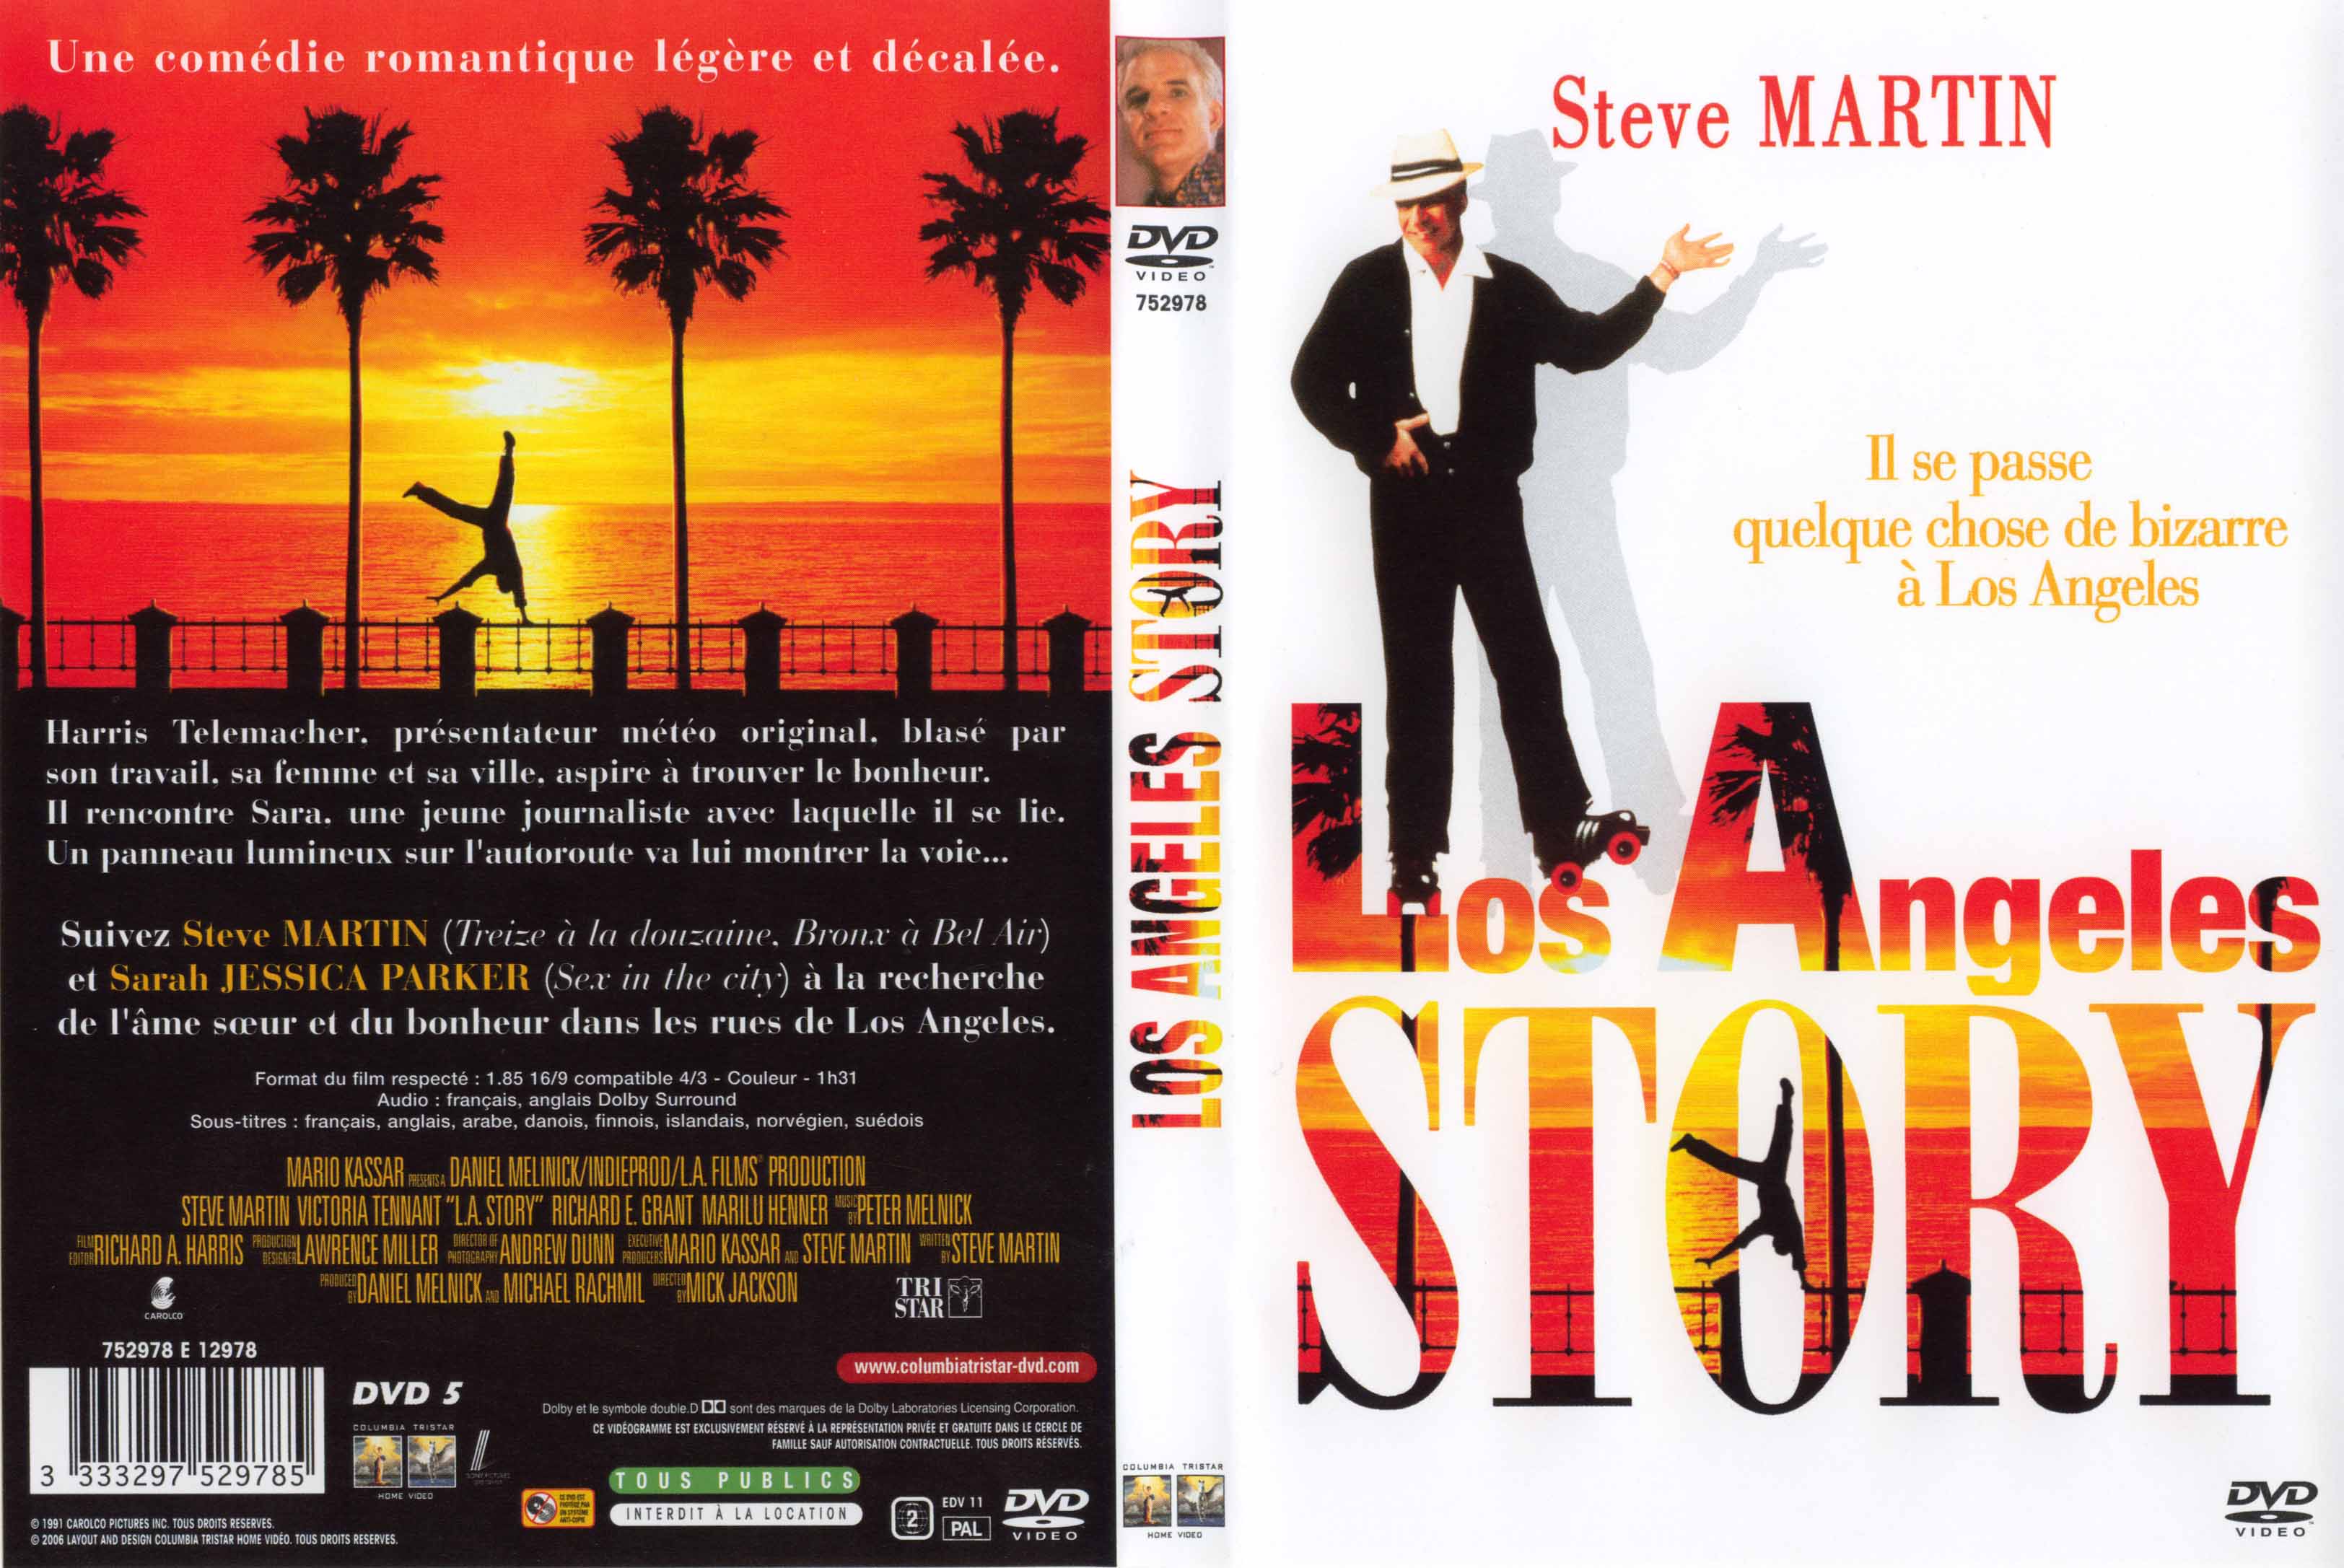 Jaquette DVD Los Angeles story